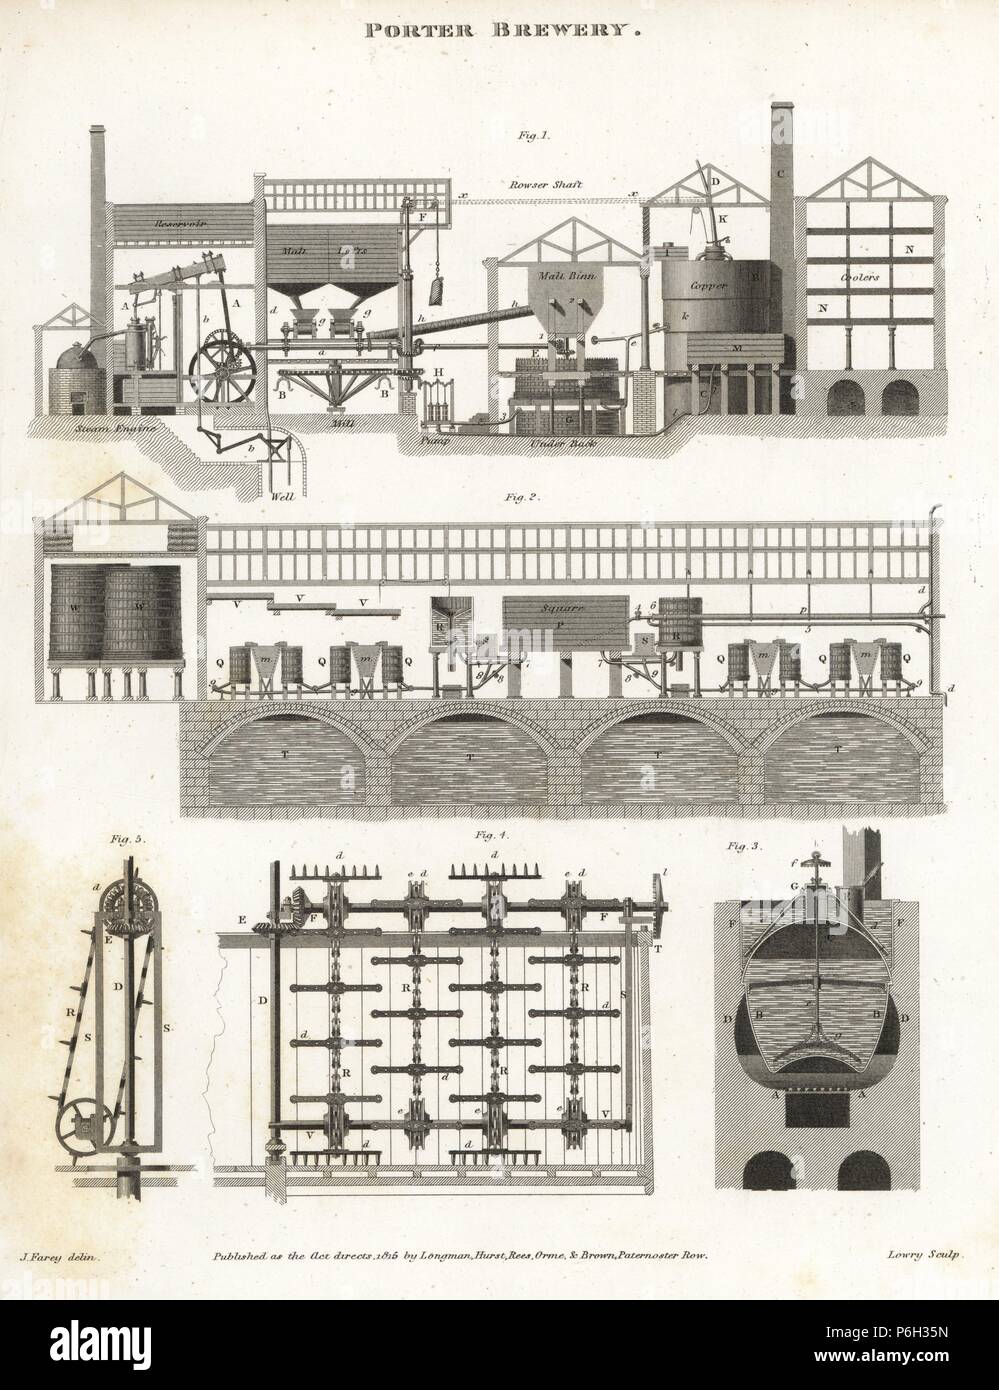 Porter brewery, powered by a steam-engine, late 18th century. Showing reservoir, steam engine, malt lofts, mill, pump, malt binns, rowser shaft, chimney, copper and coolers. Copperplate engraving by Wilson Lowry after an illustration by J. Farey from Abraham Rees' 'Cyclopedia or Universal Dictionary,' London, 1816. Stock Photo